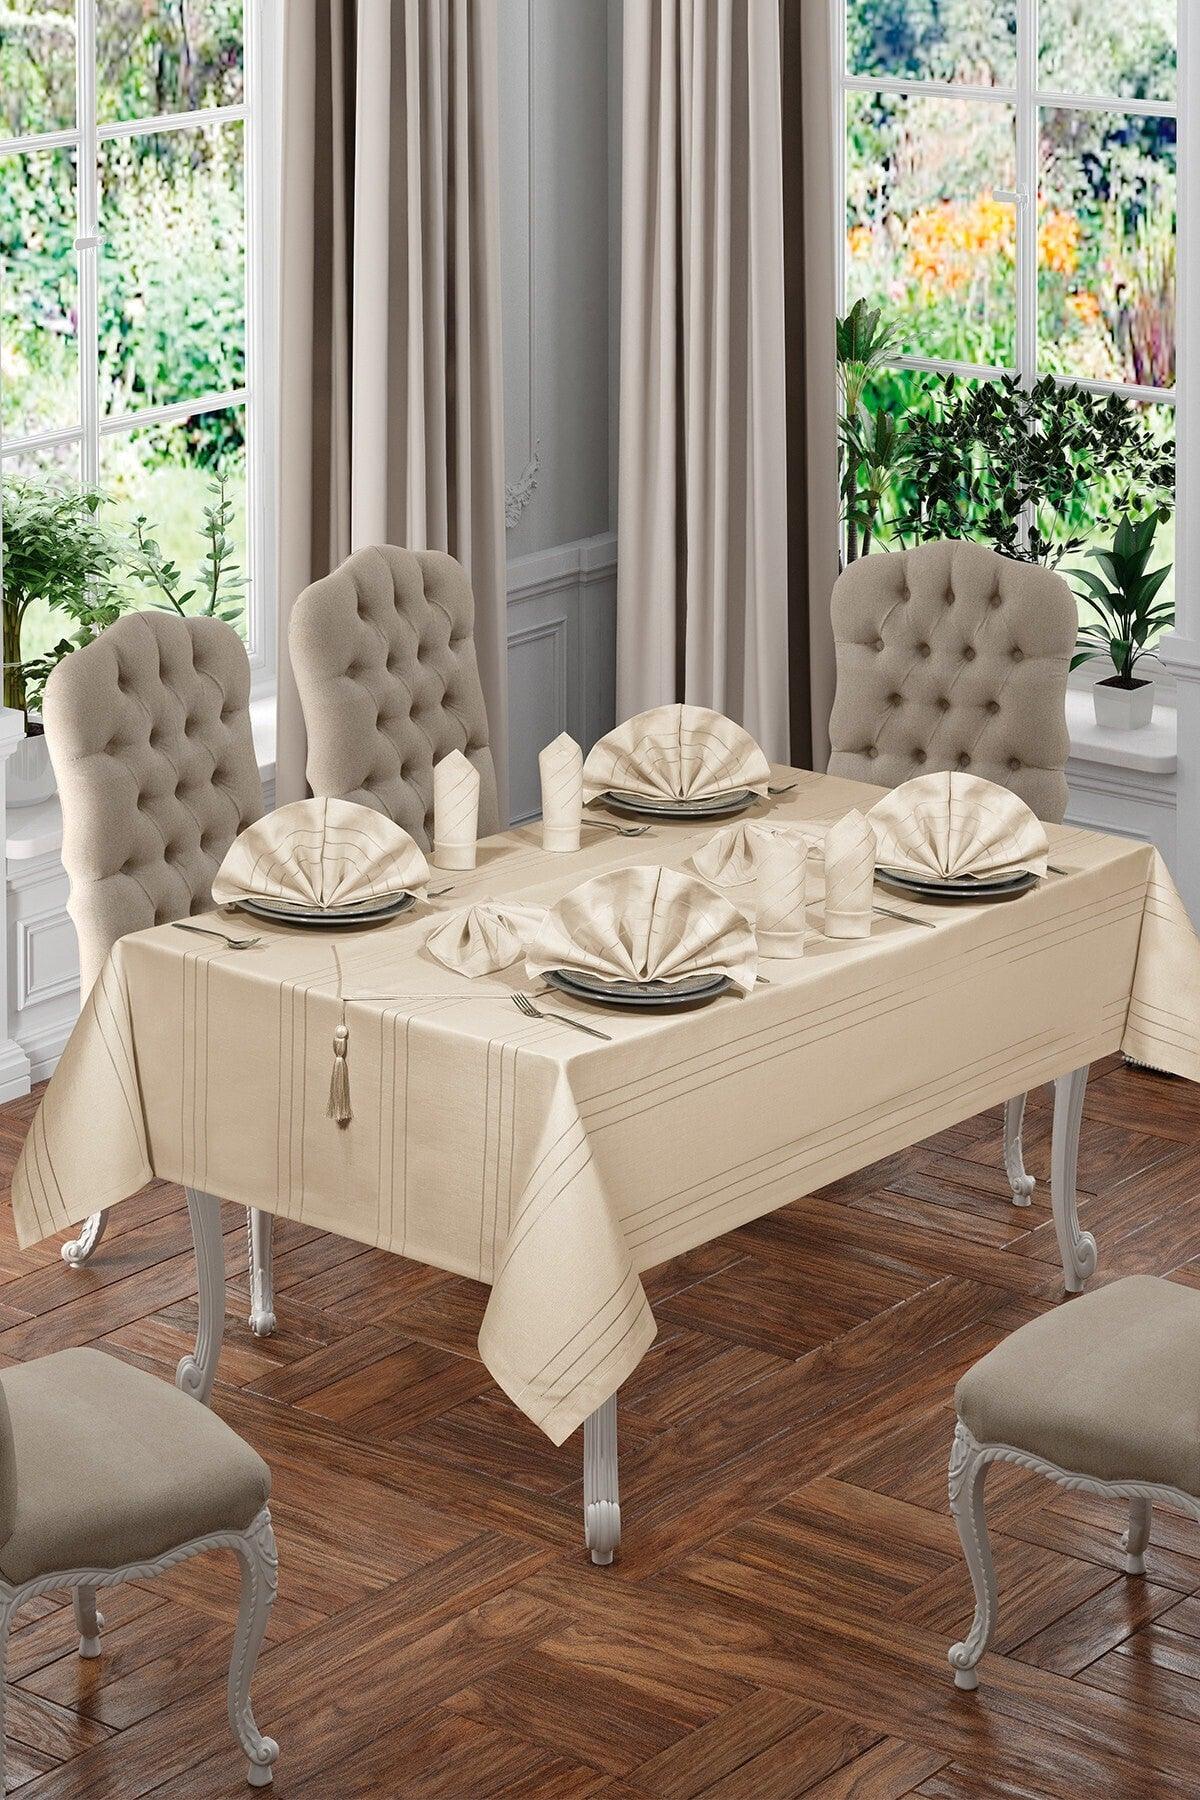 Luxury Colber Table Cloth Set 12 Person Colber (cappuccino) - Swordslife